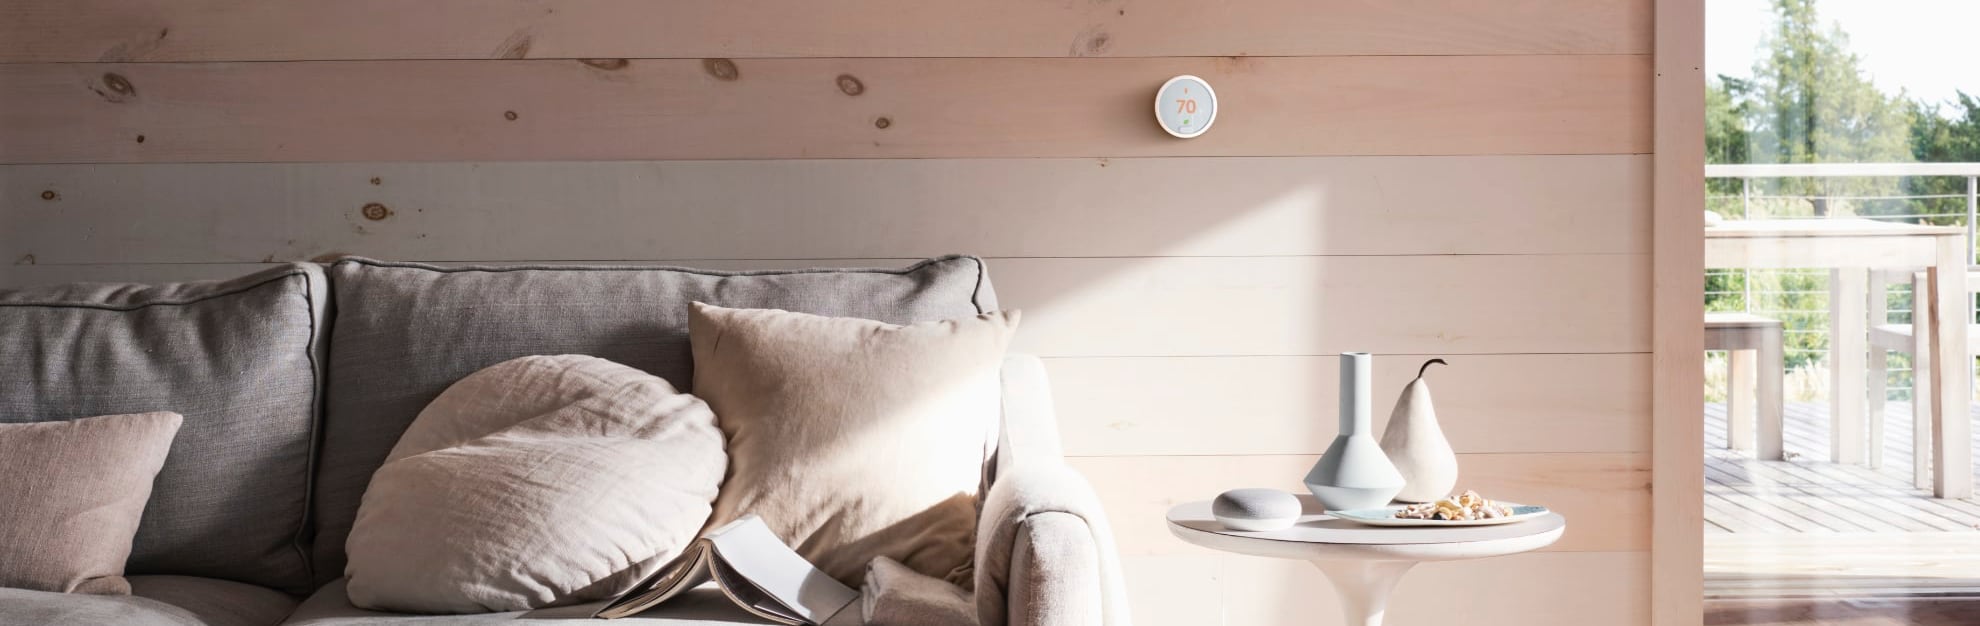 Vivint Home Automation in Gainesville